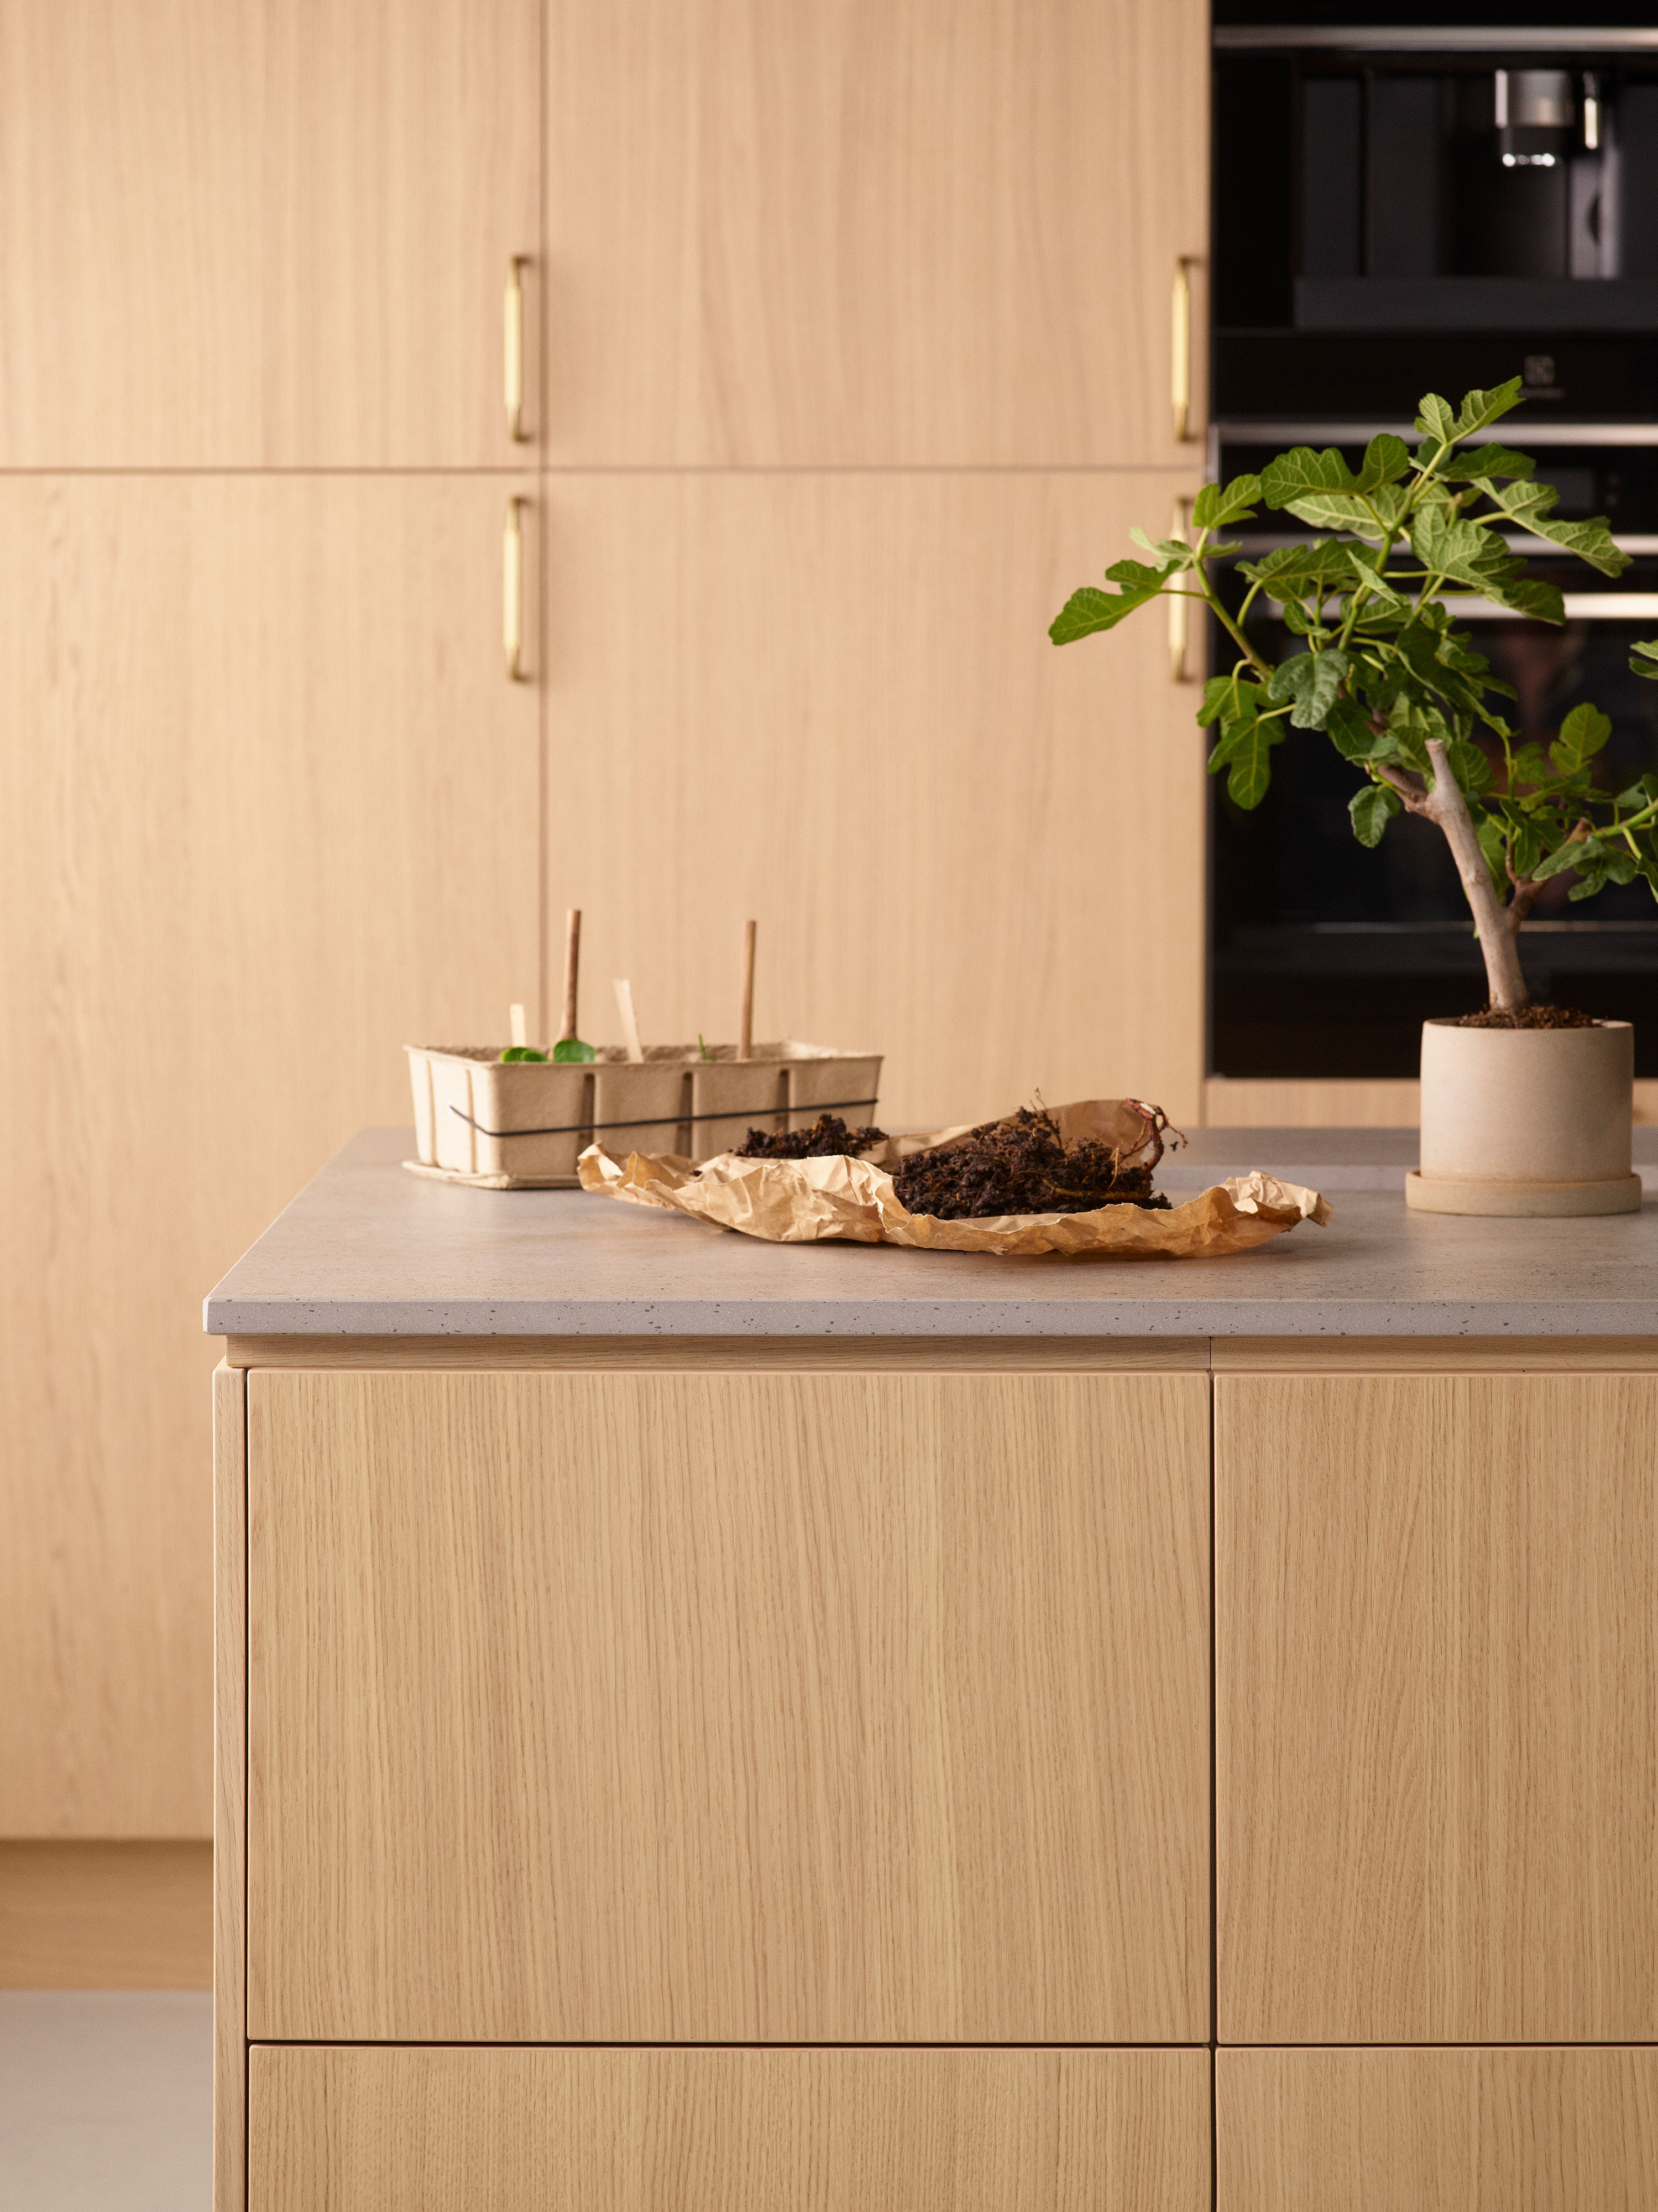 Wooden Epoq Edge Natural Oak kitchen and a plant on worktop